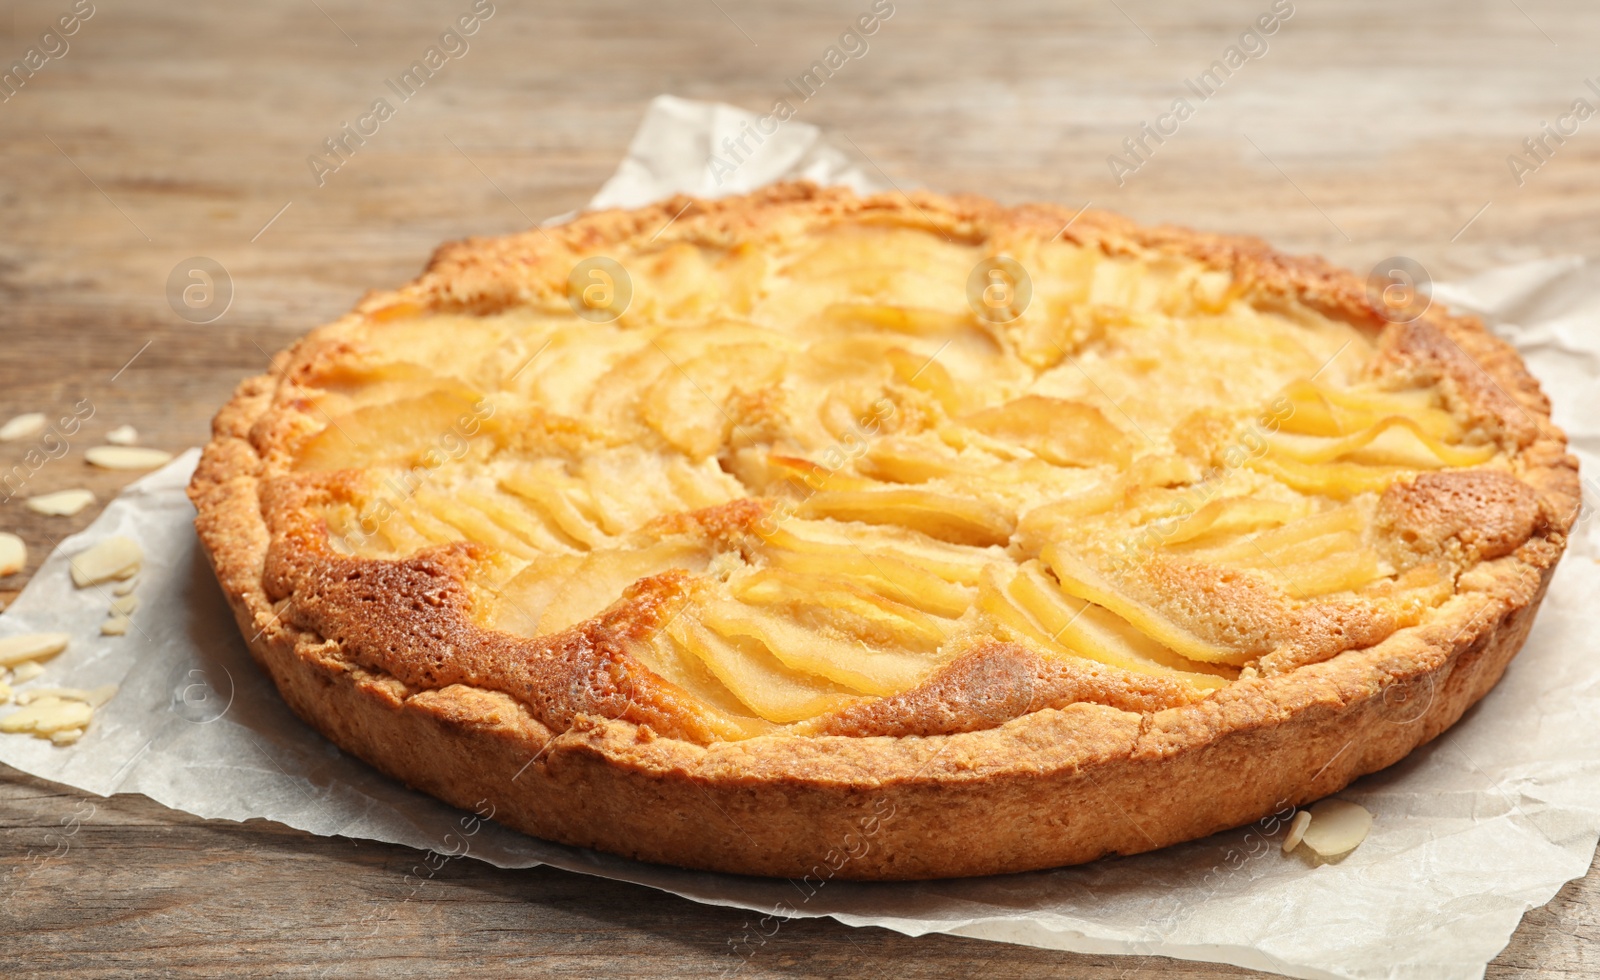 Photo of Delicious sweet pear tart on wooden table